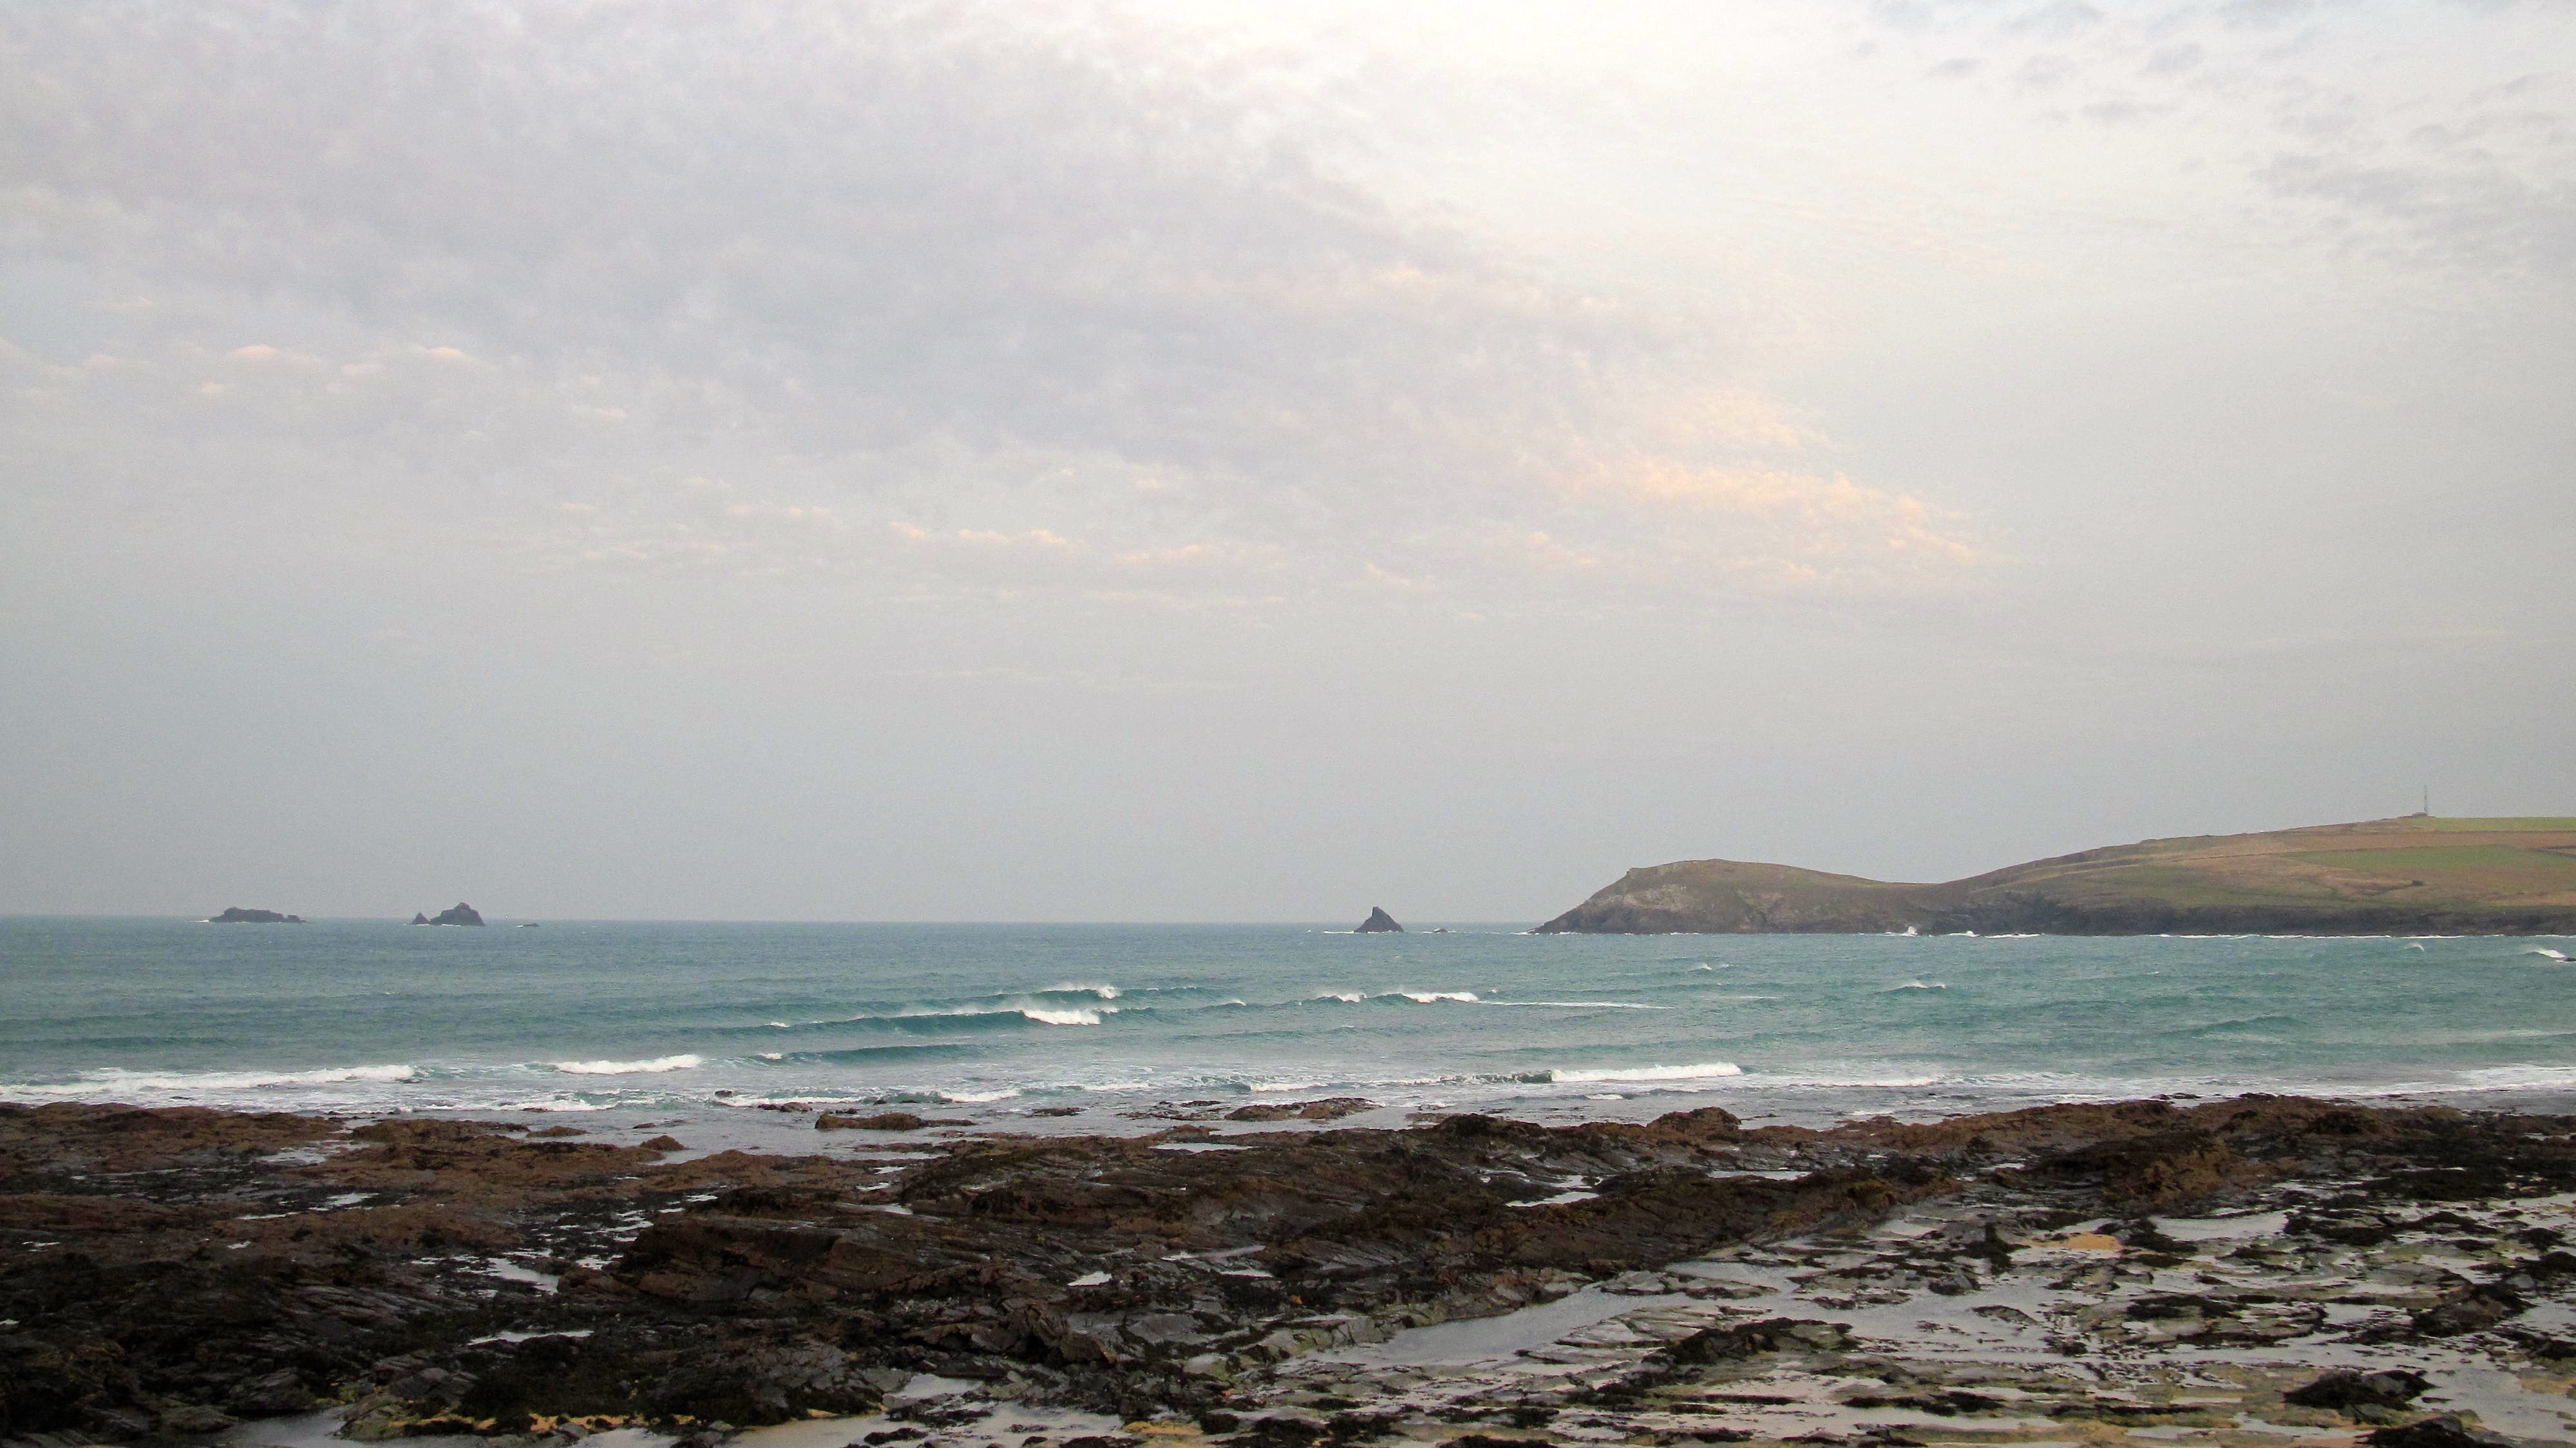 Surf Report for Friday 31st October 2014